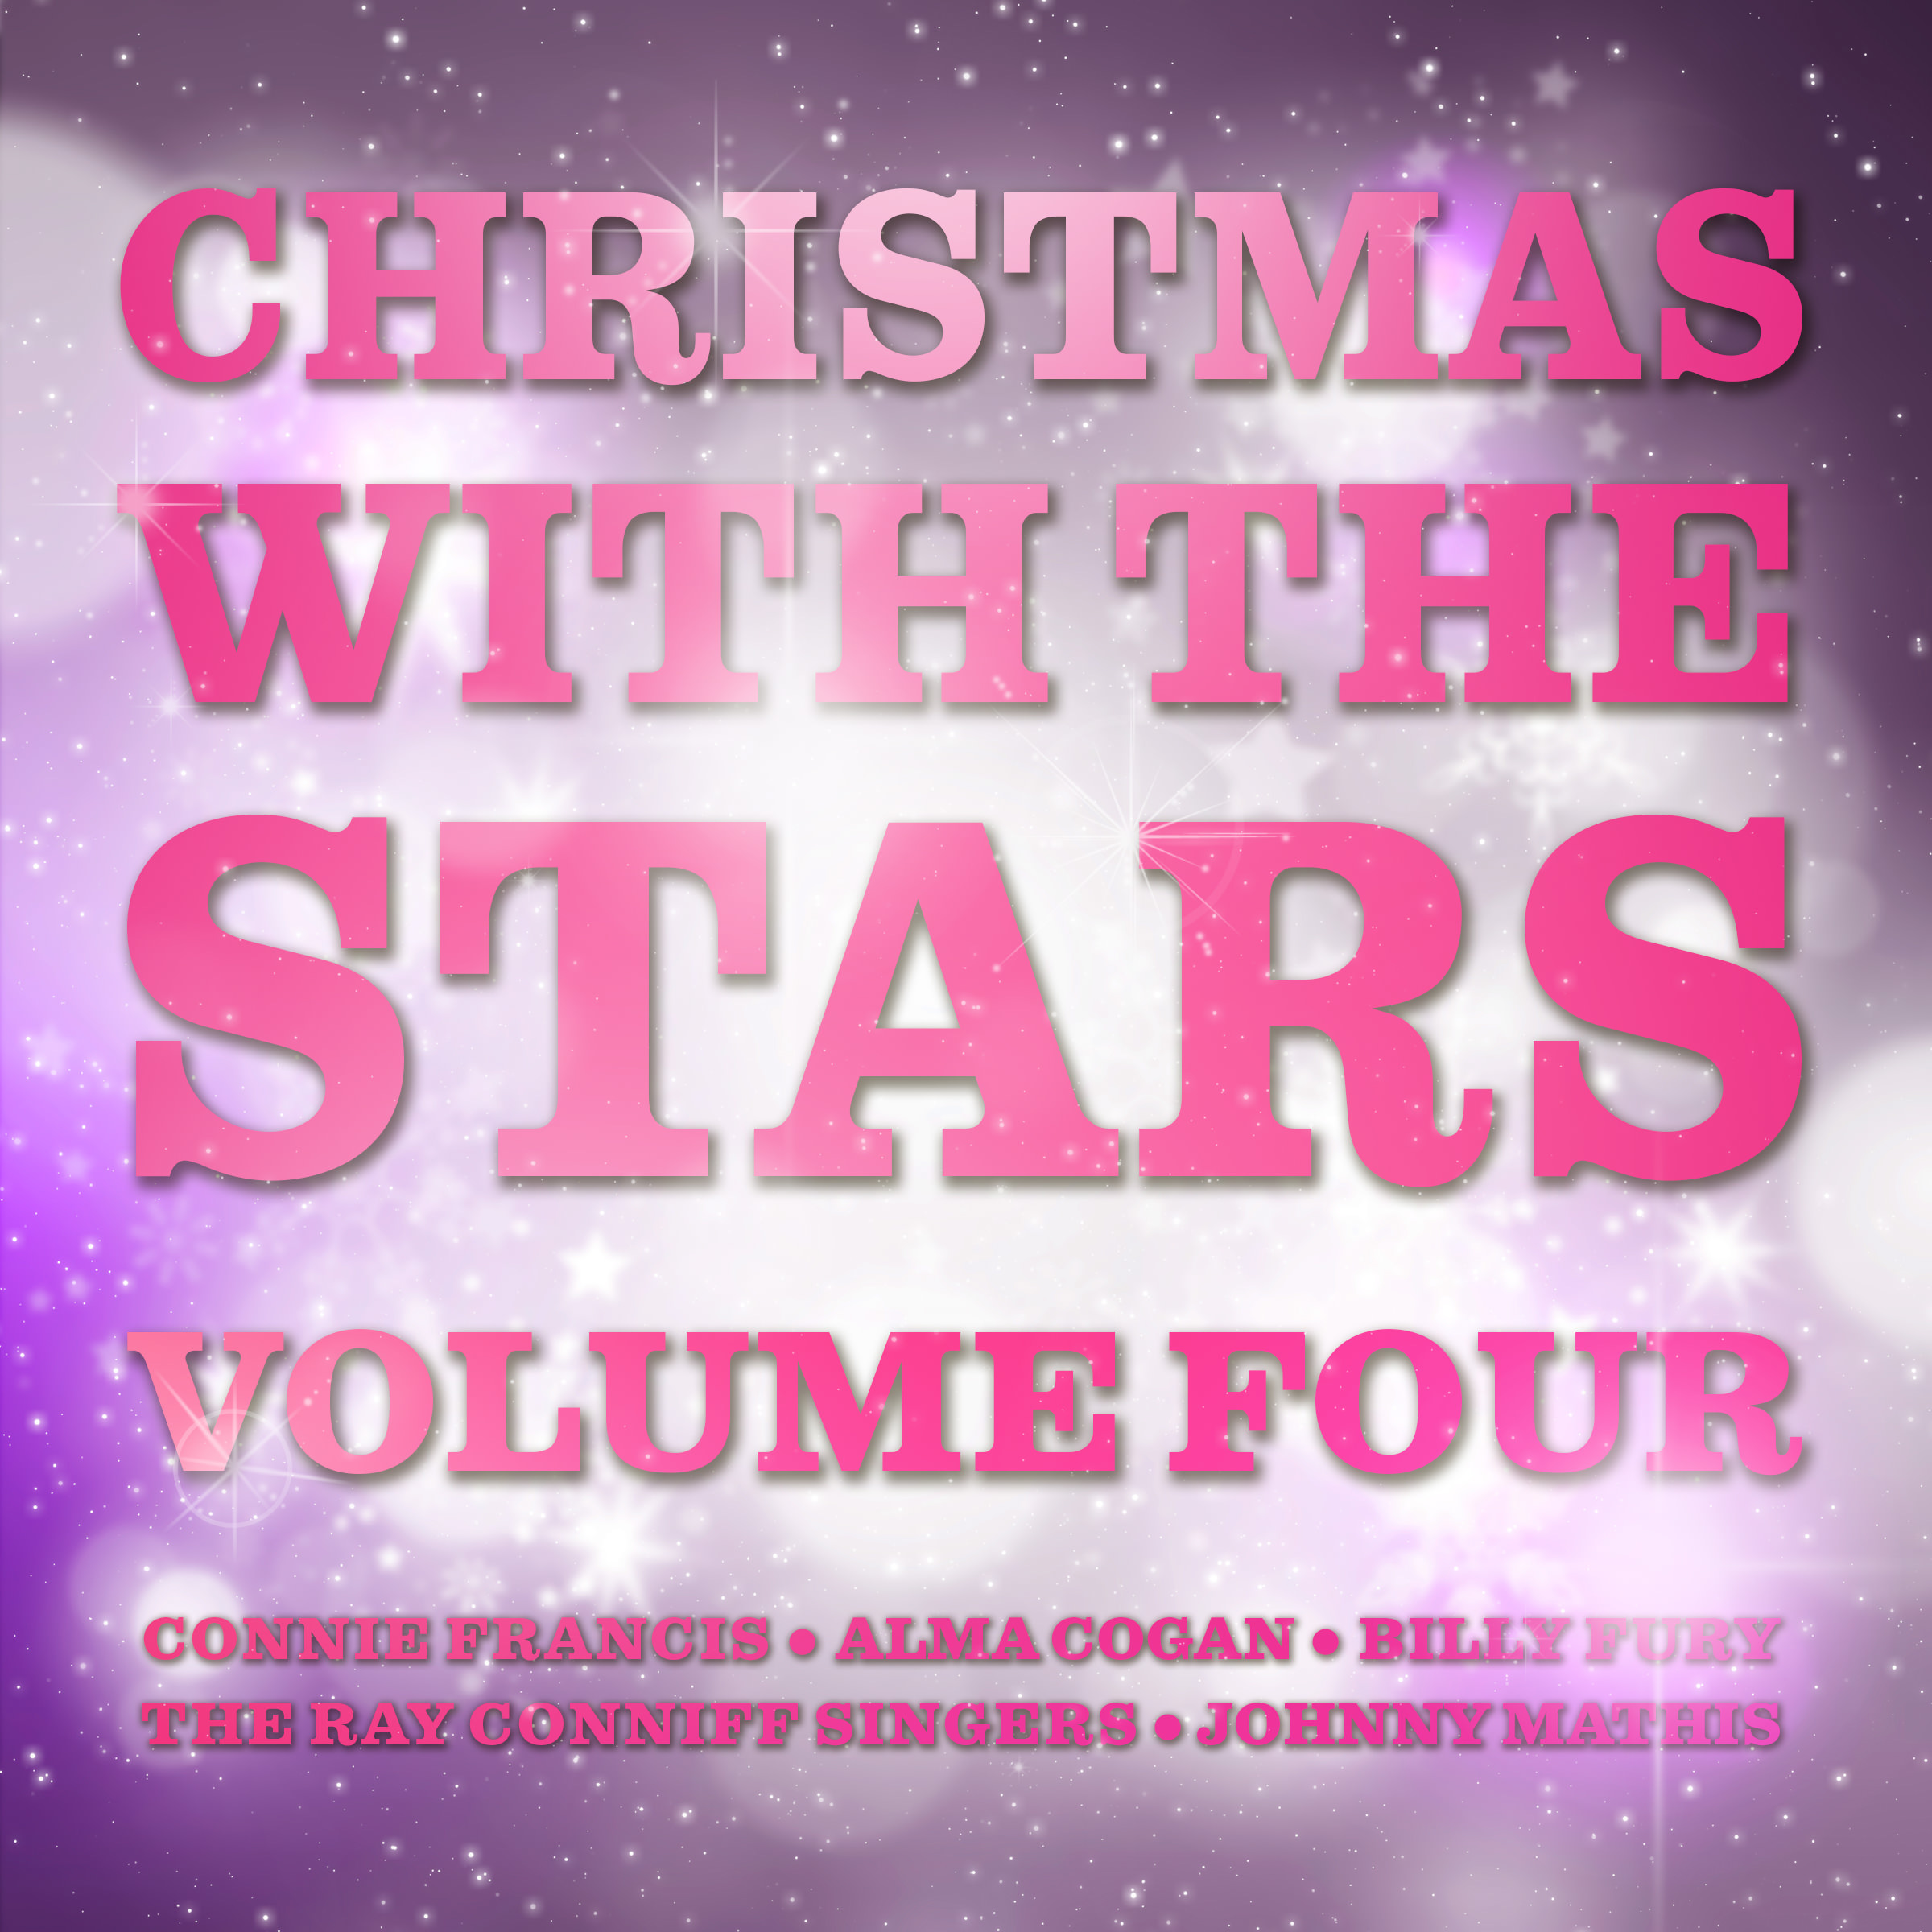 Christmas With The Stars, Volume 4